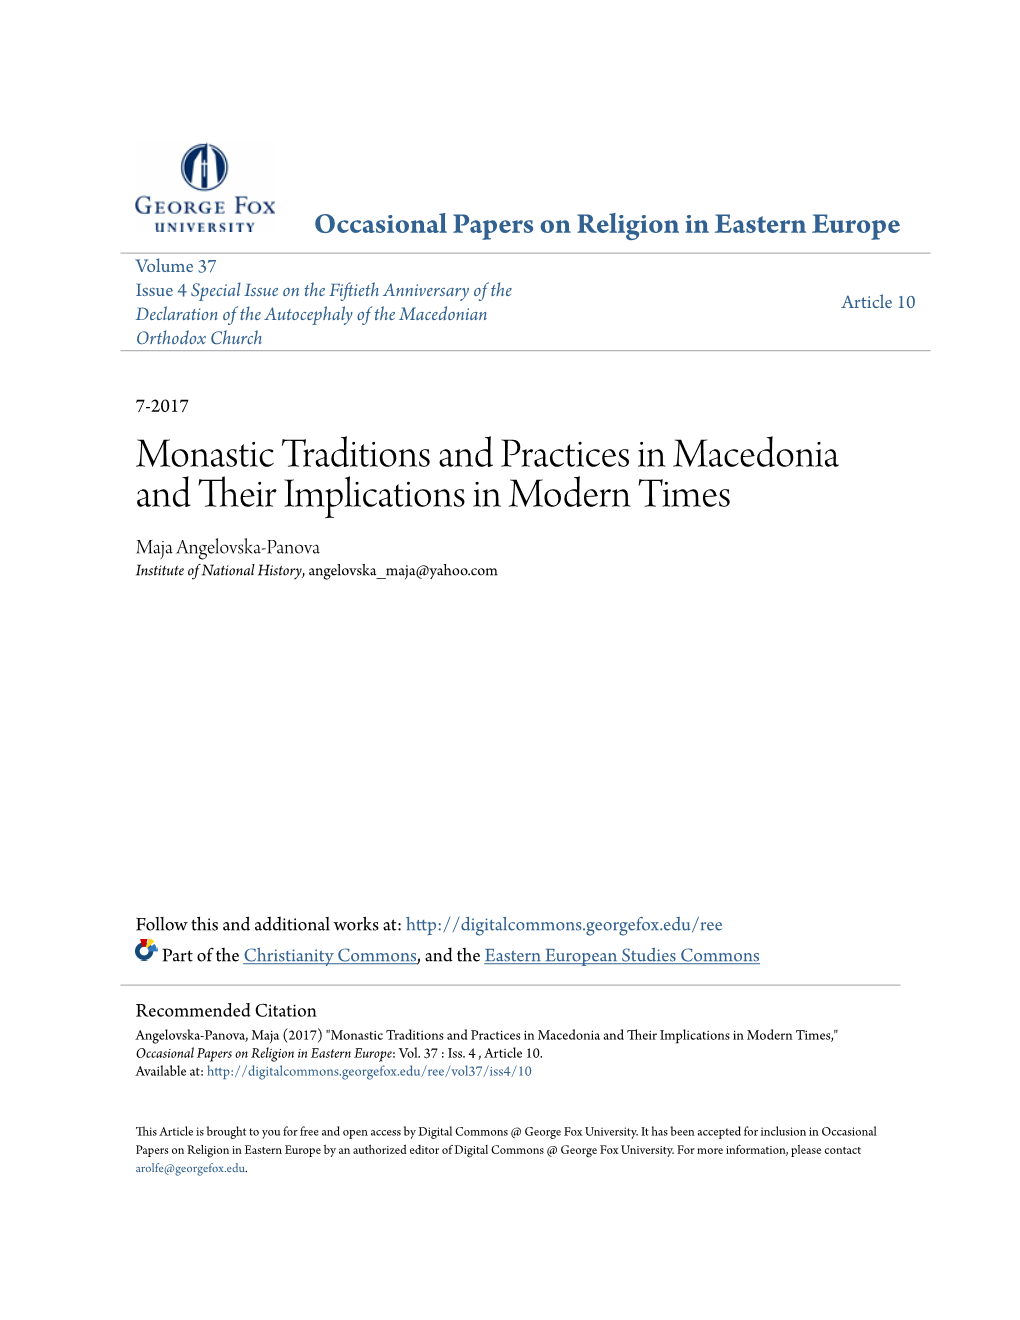 Monastic Traditions and Practices in Macedonia and Their Implications in Modern Times